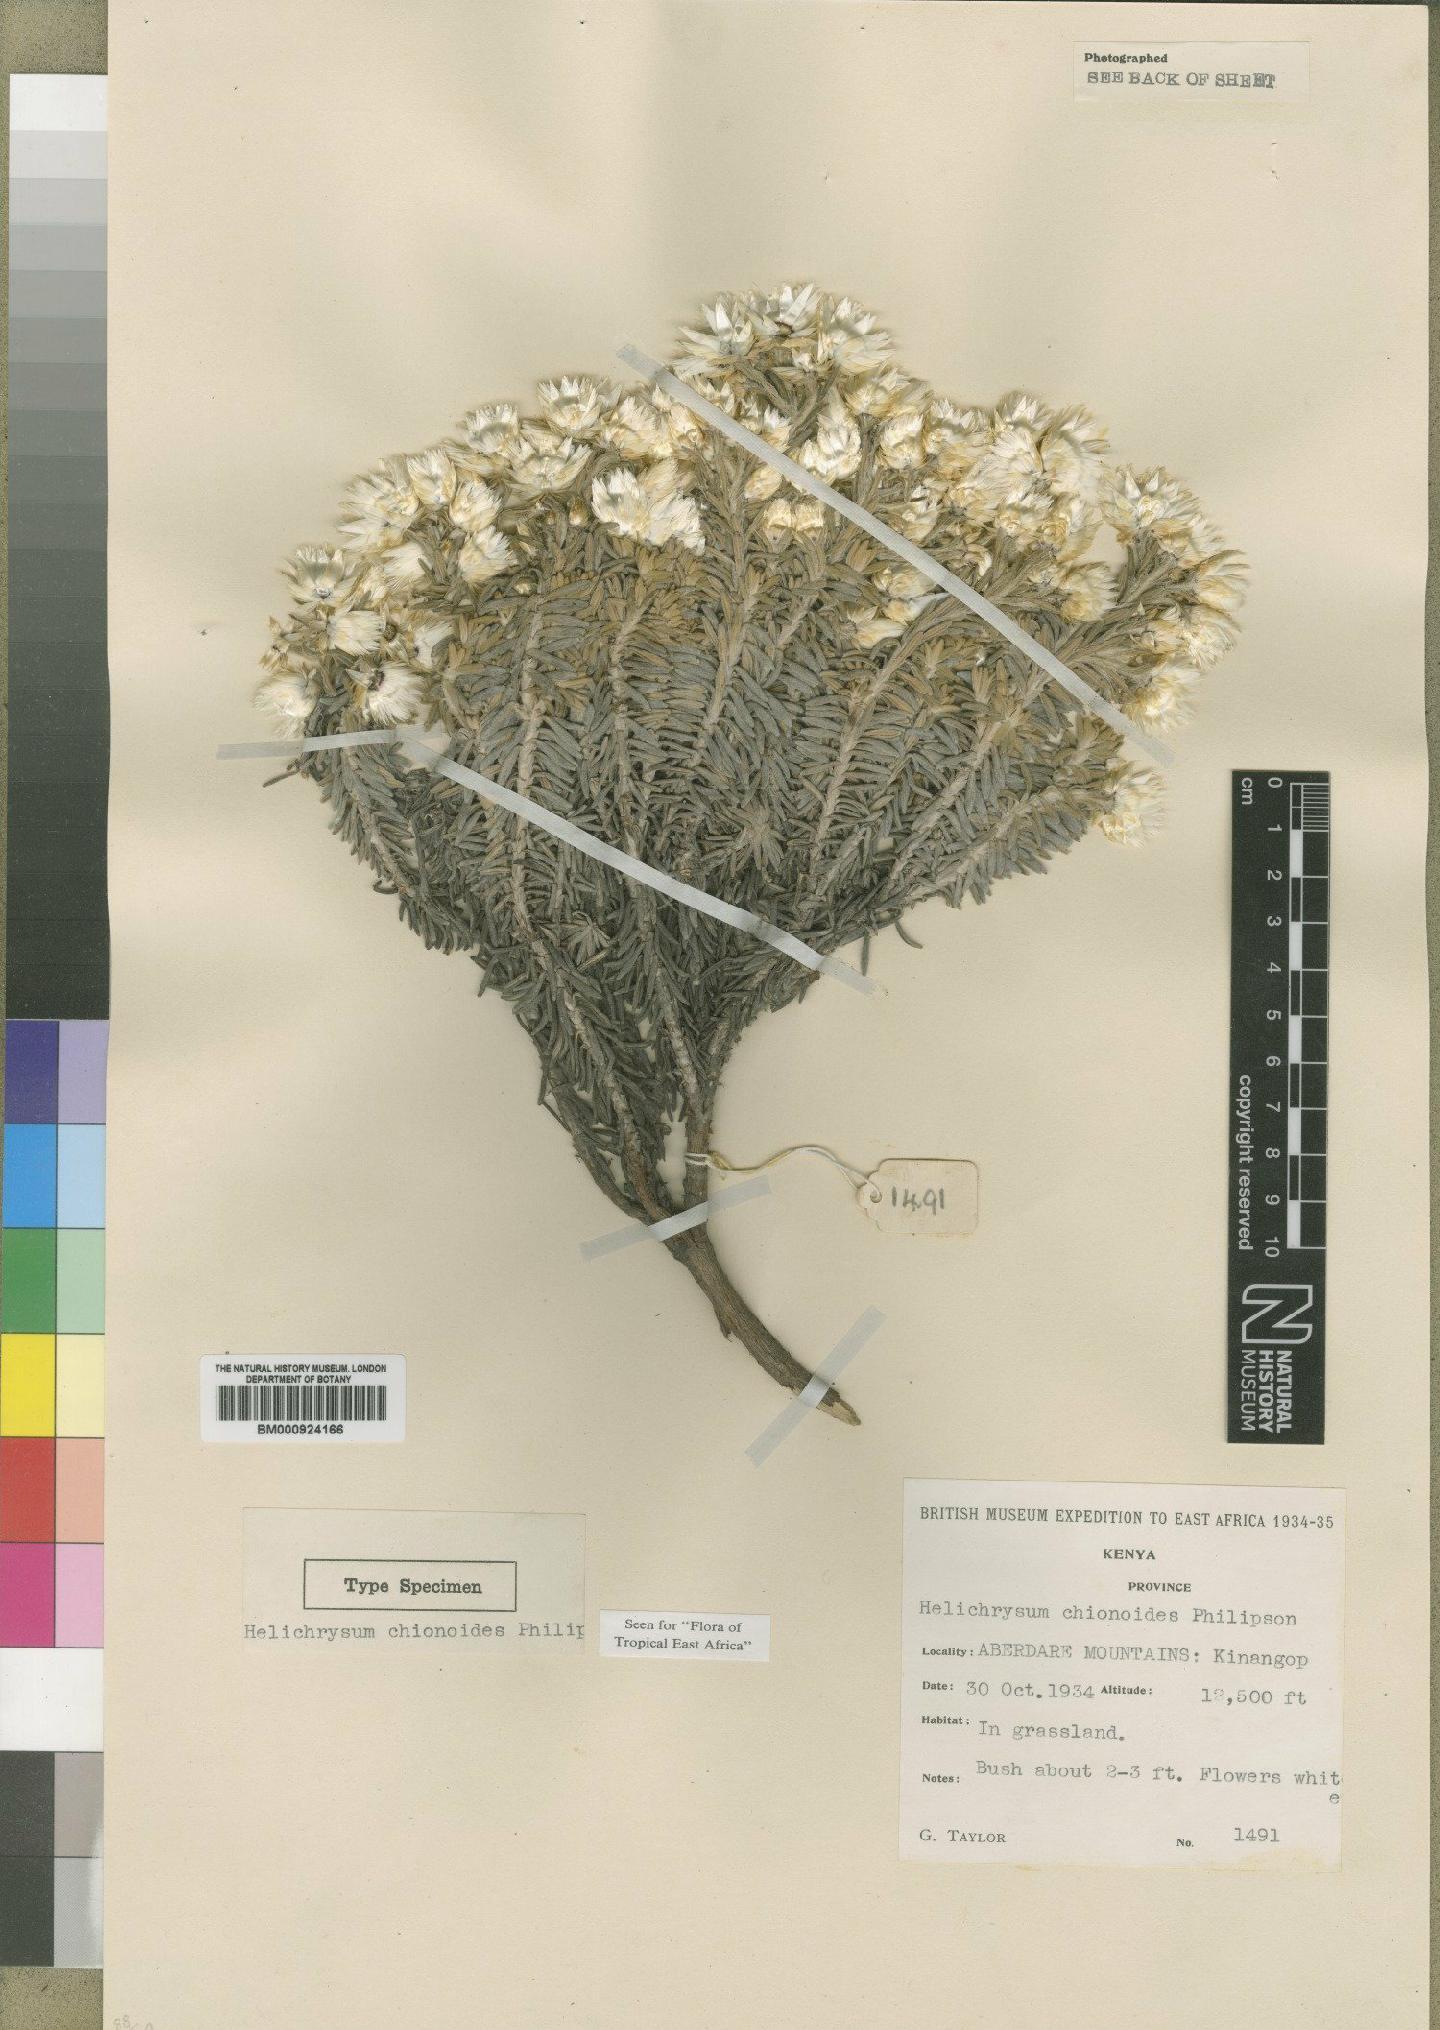 To NHMUK collection (Helichrysum chionoides Philipson; Type; NHMUK:ecatalogue:4529194)